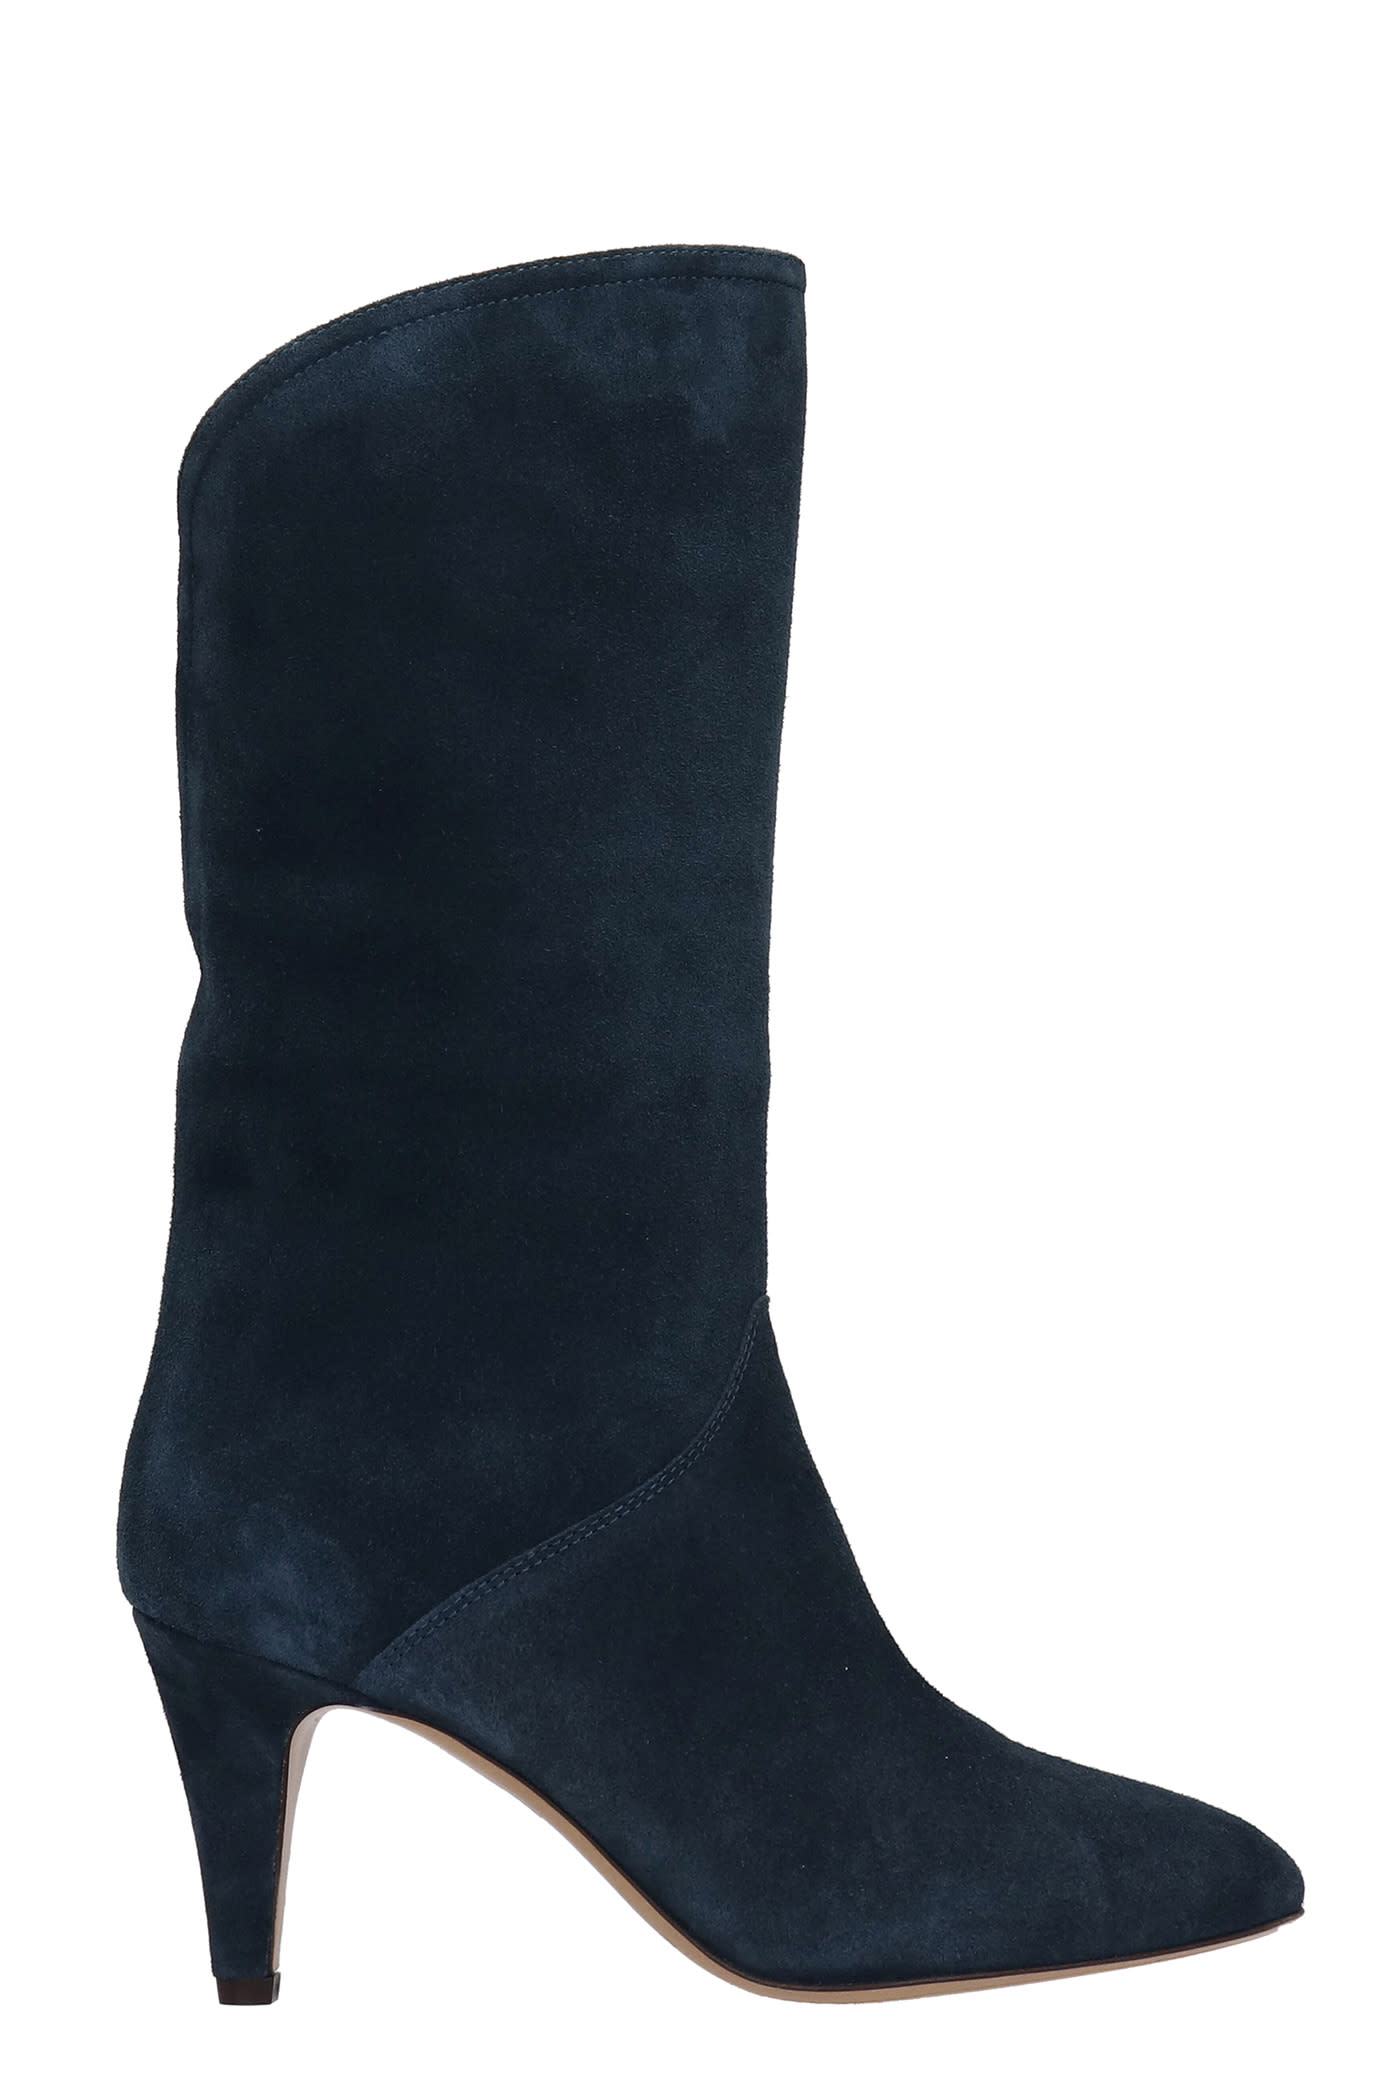 Isabel Marant Leye High Heels Ankle Boots In Petroleum Suede